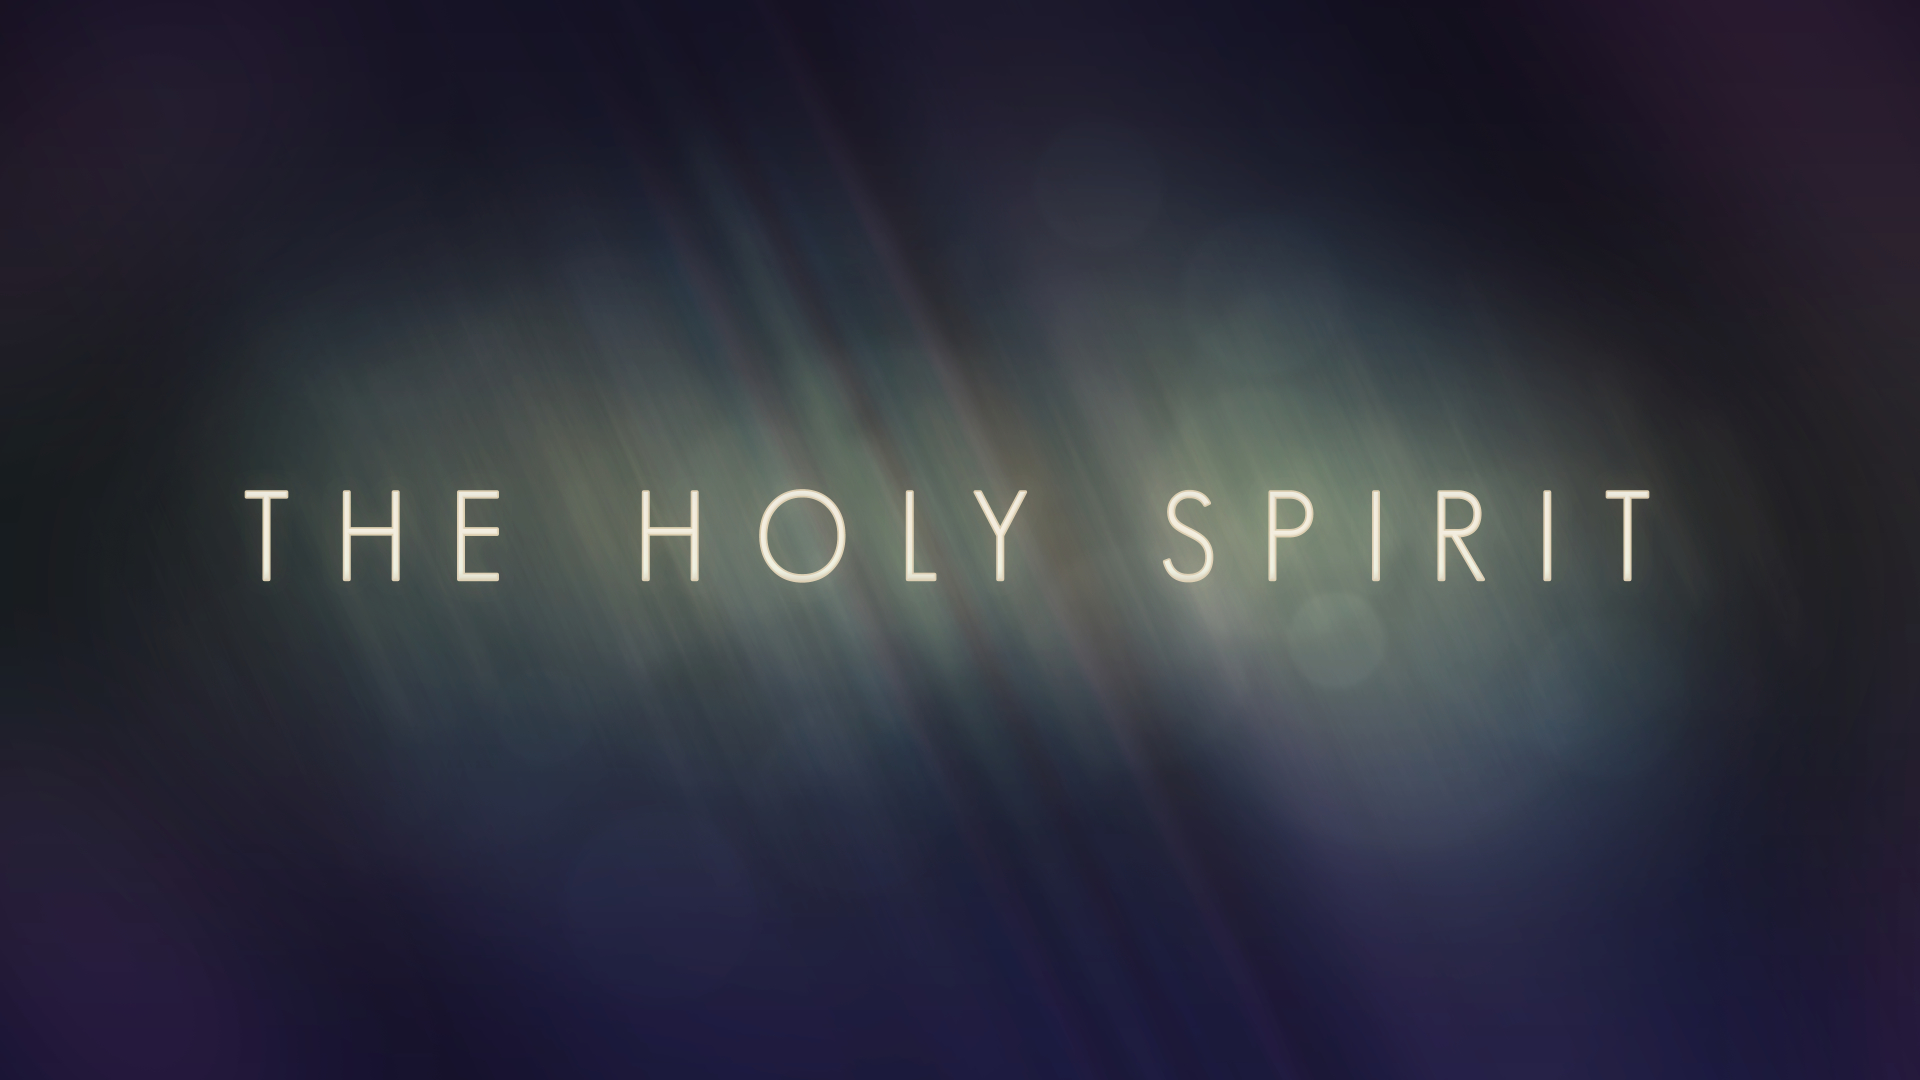 Intimacy With The Holy Spirit